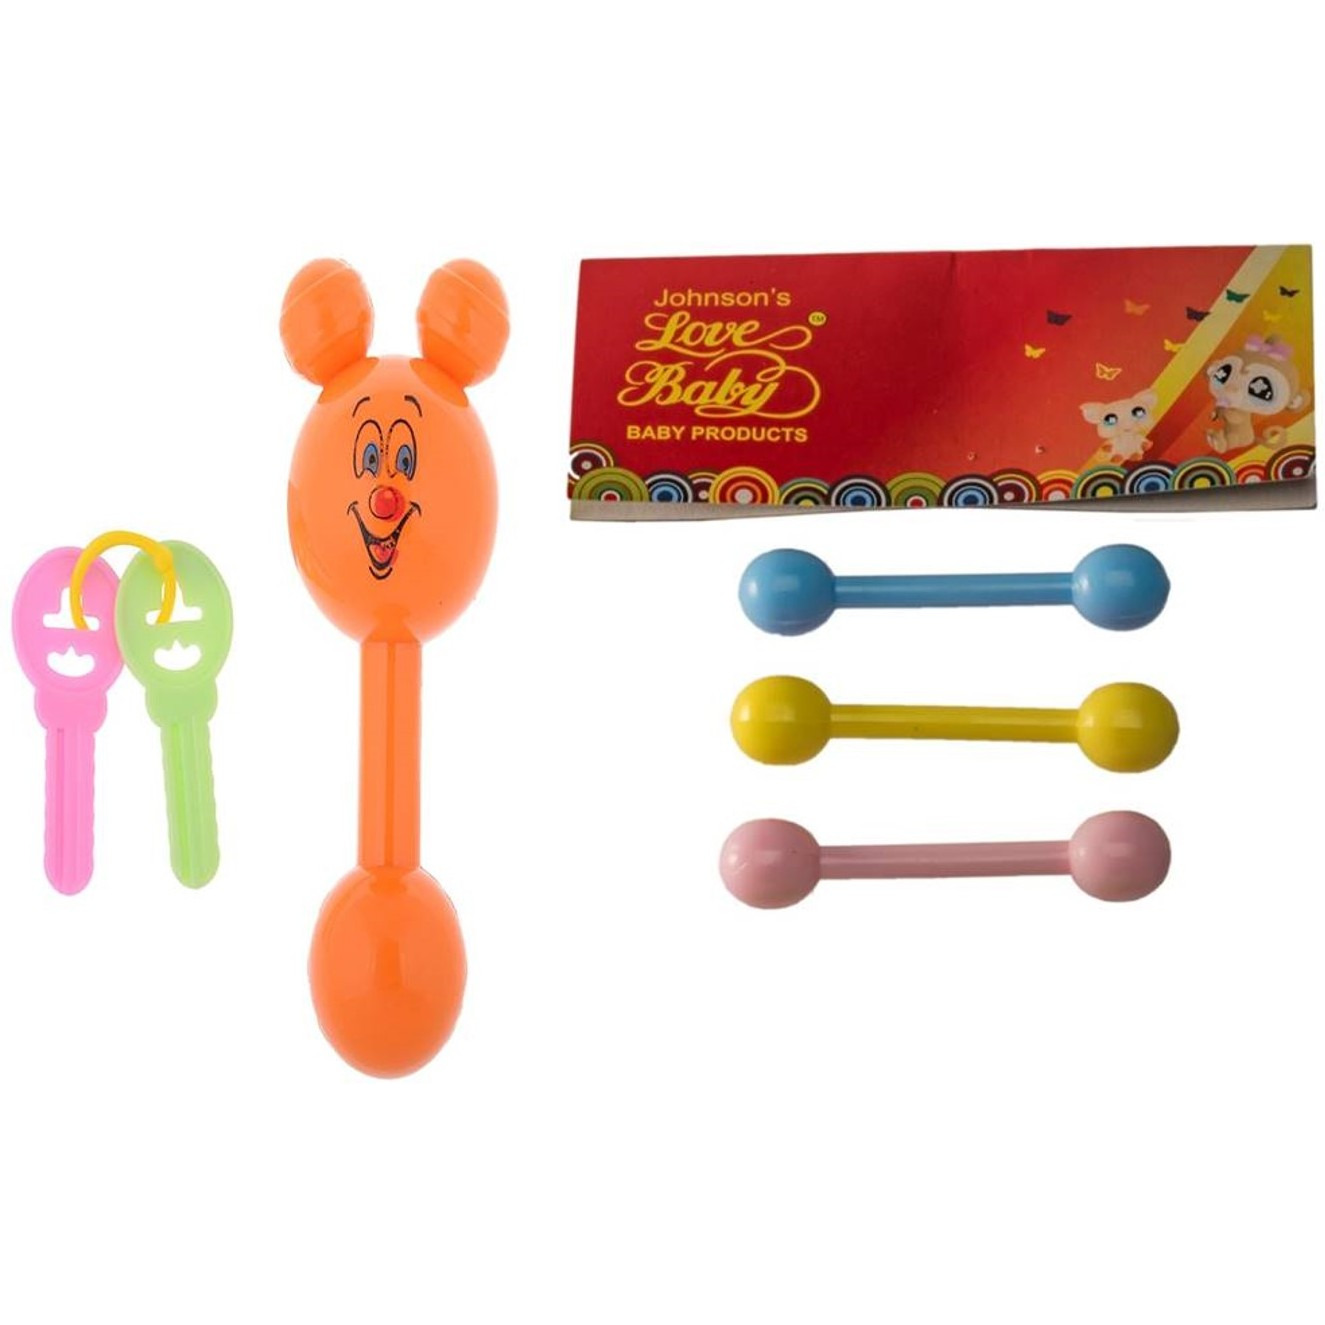 Auto Flow Rattle Toy - Jinny Toy - BT27 Combo Peach